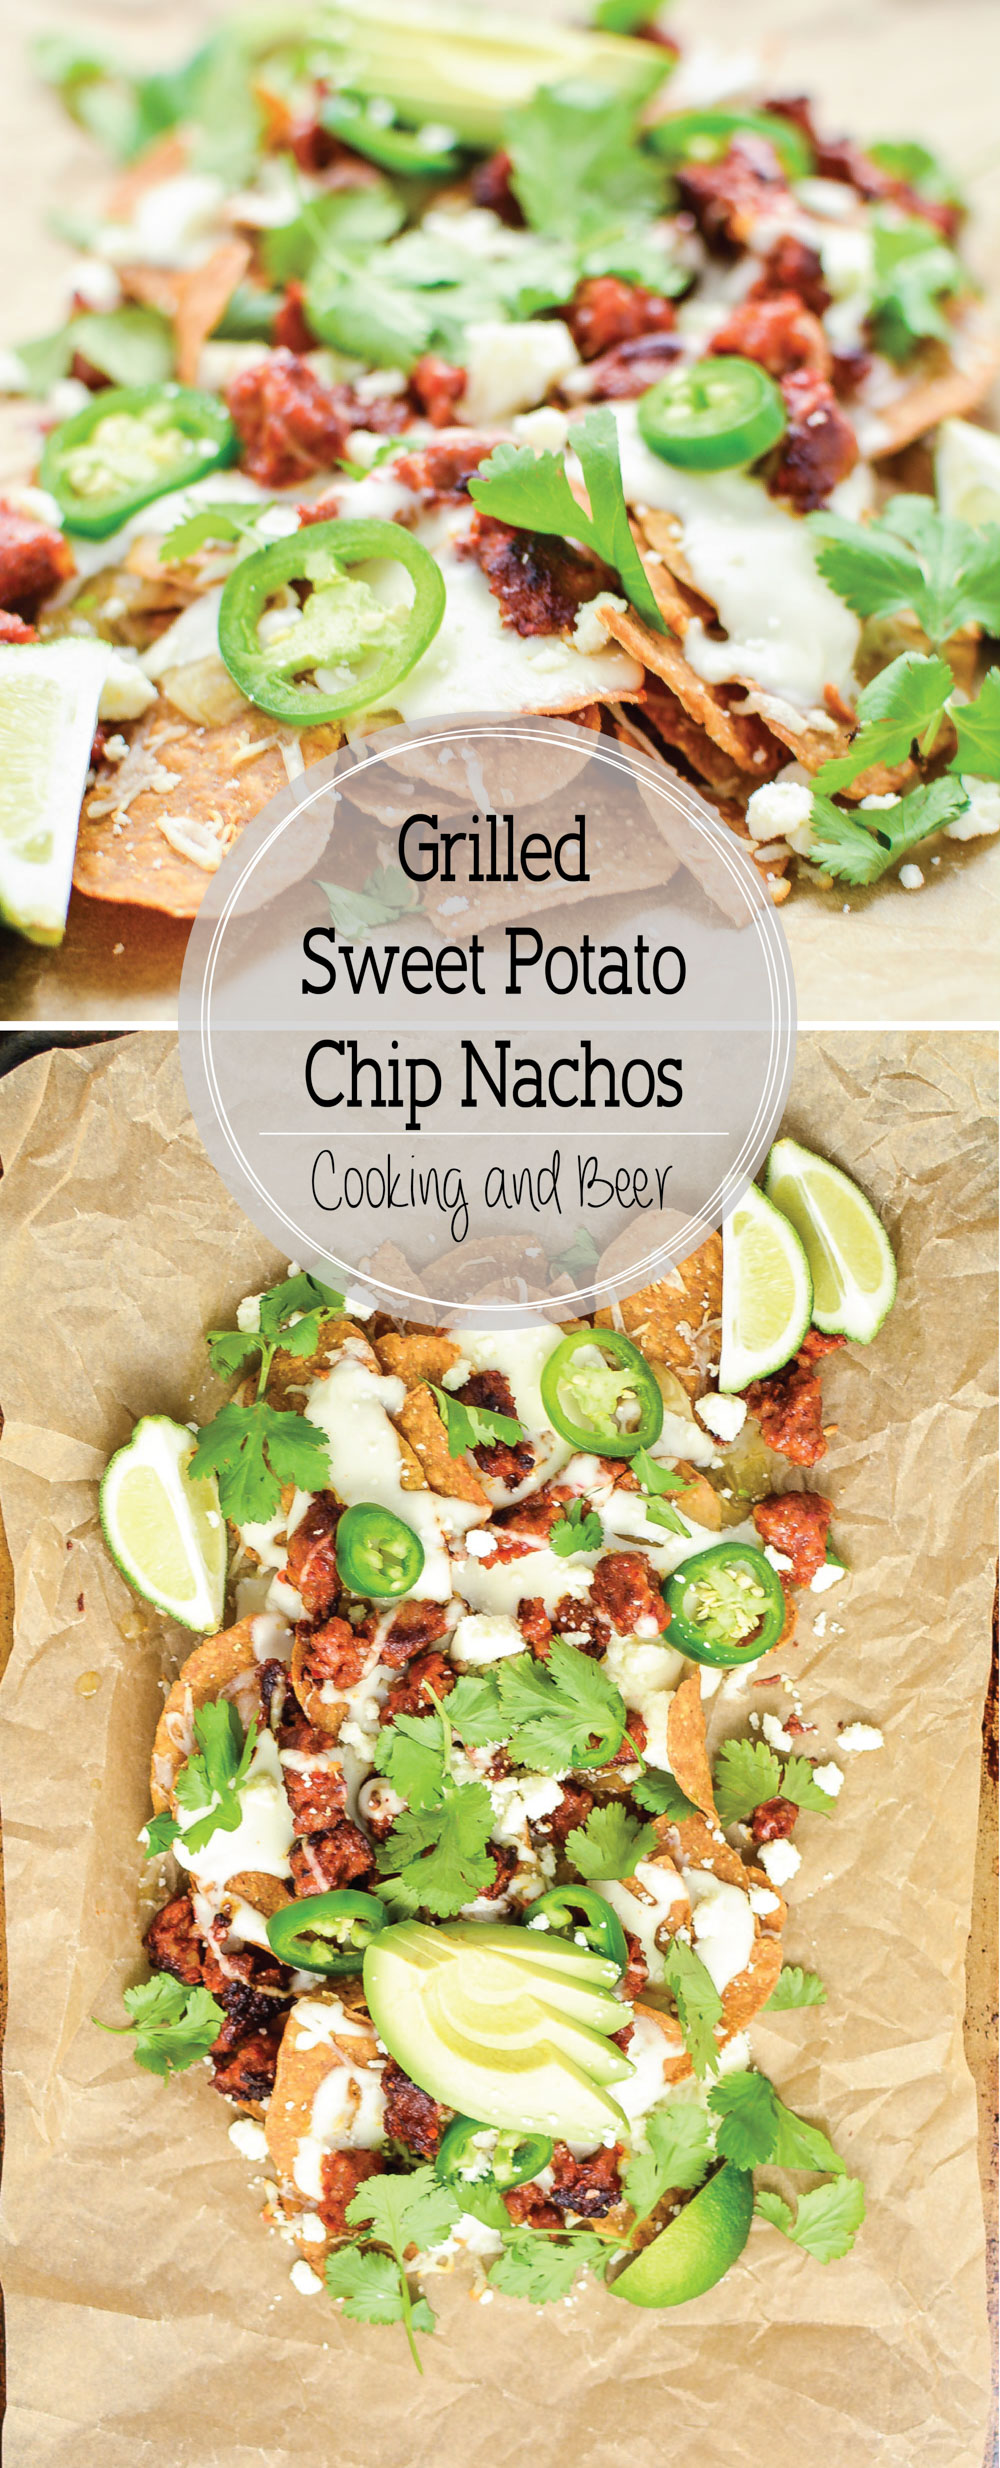 Grilled Sweet Potato Chip Nachos are a fun way to put that grill to use! They have the perfect spice factor!